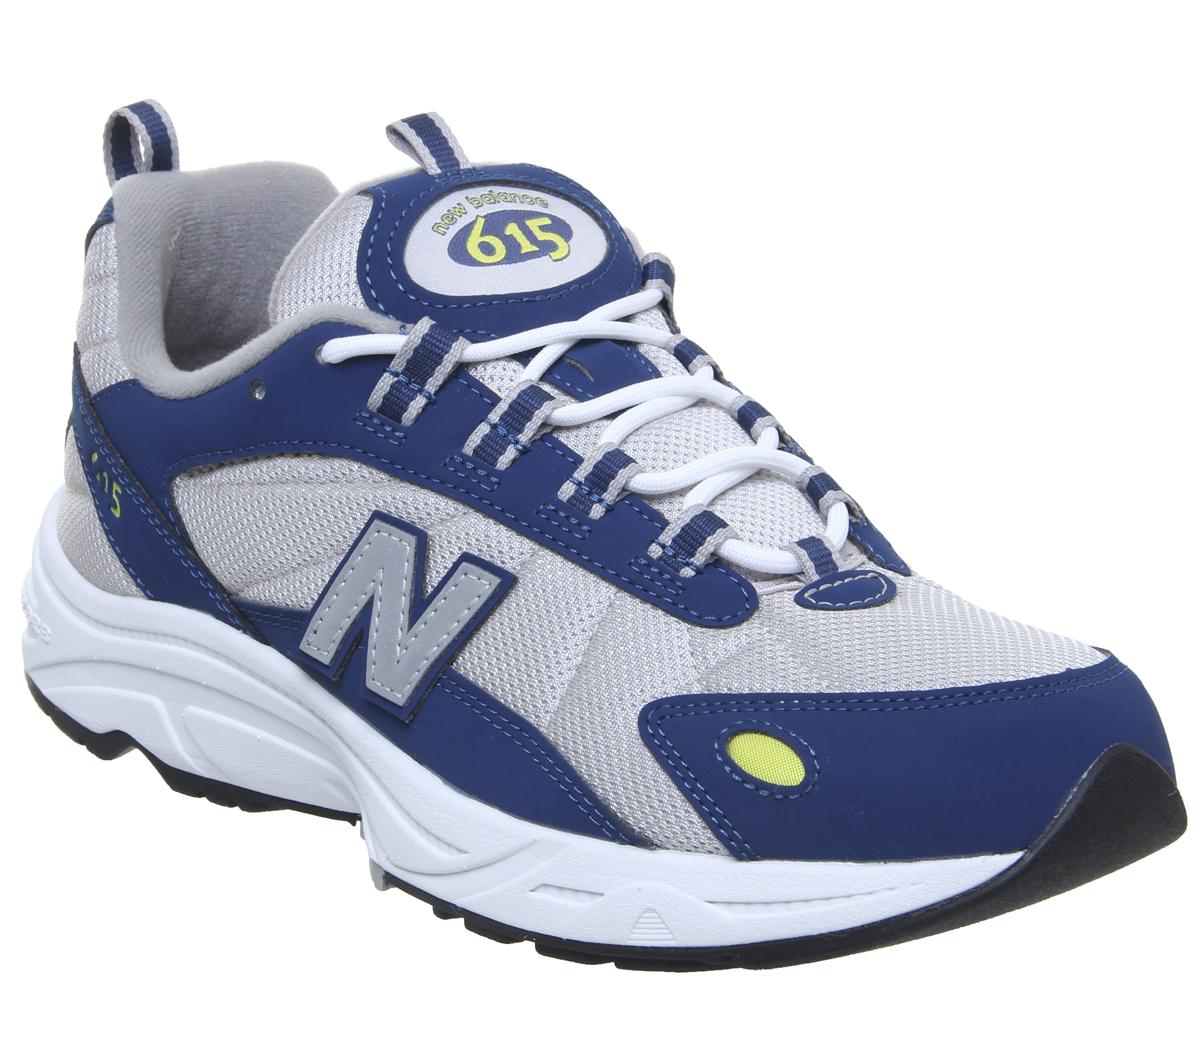 New Balance 615 Trainers Blue Silver 